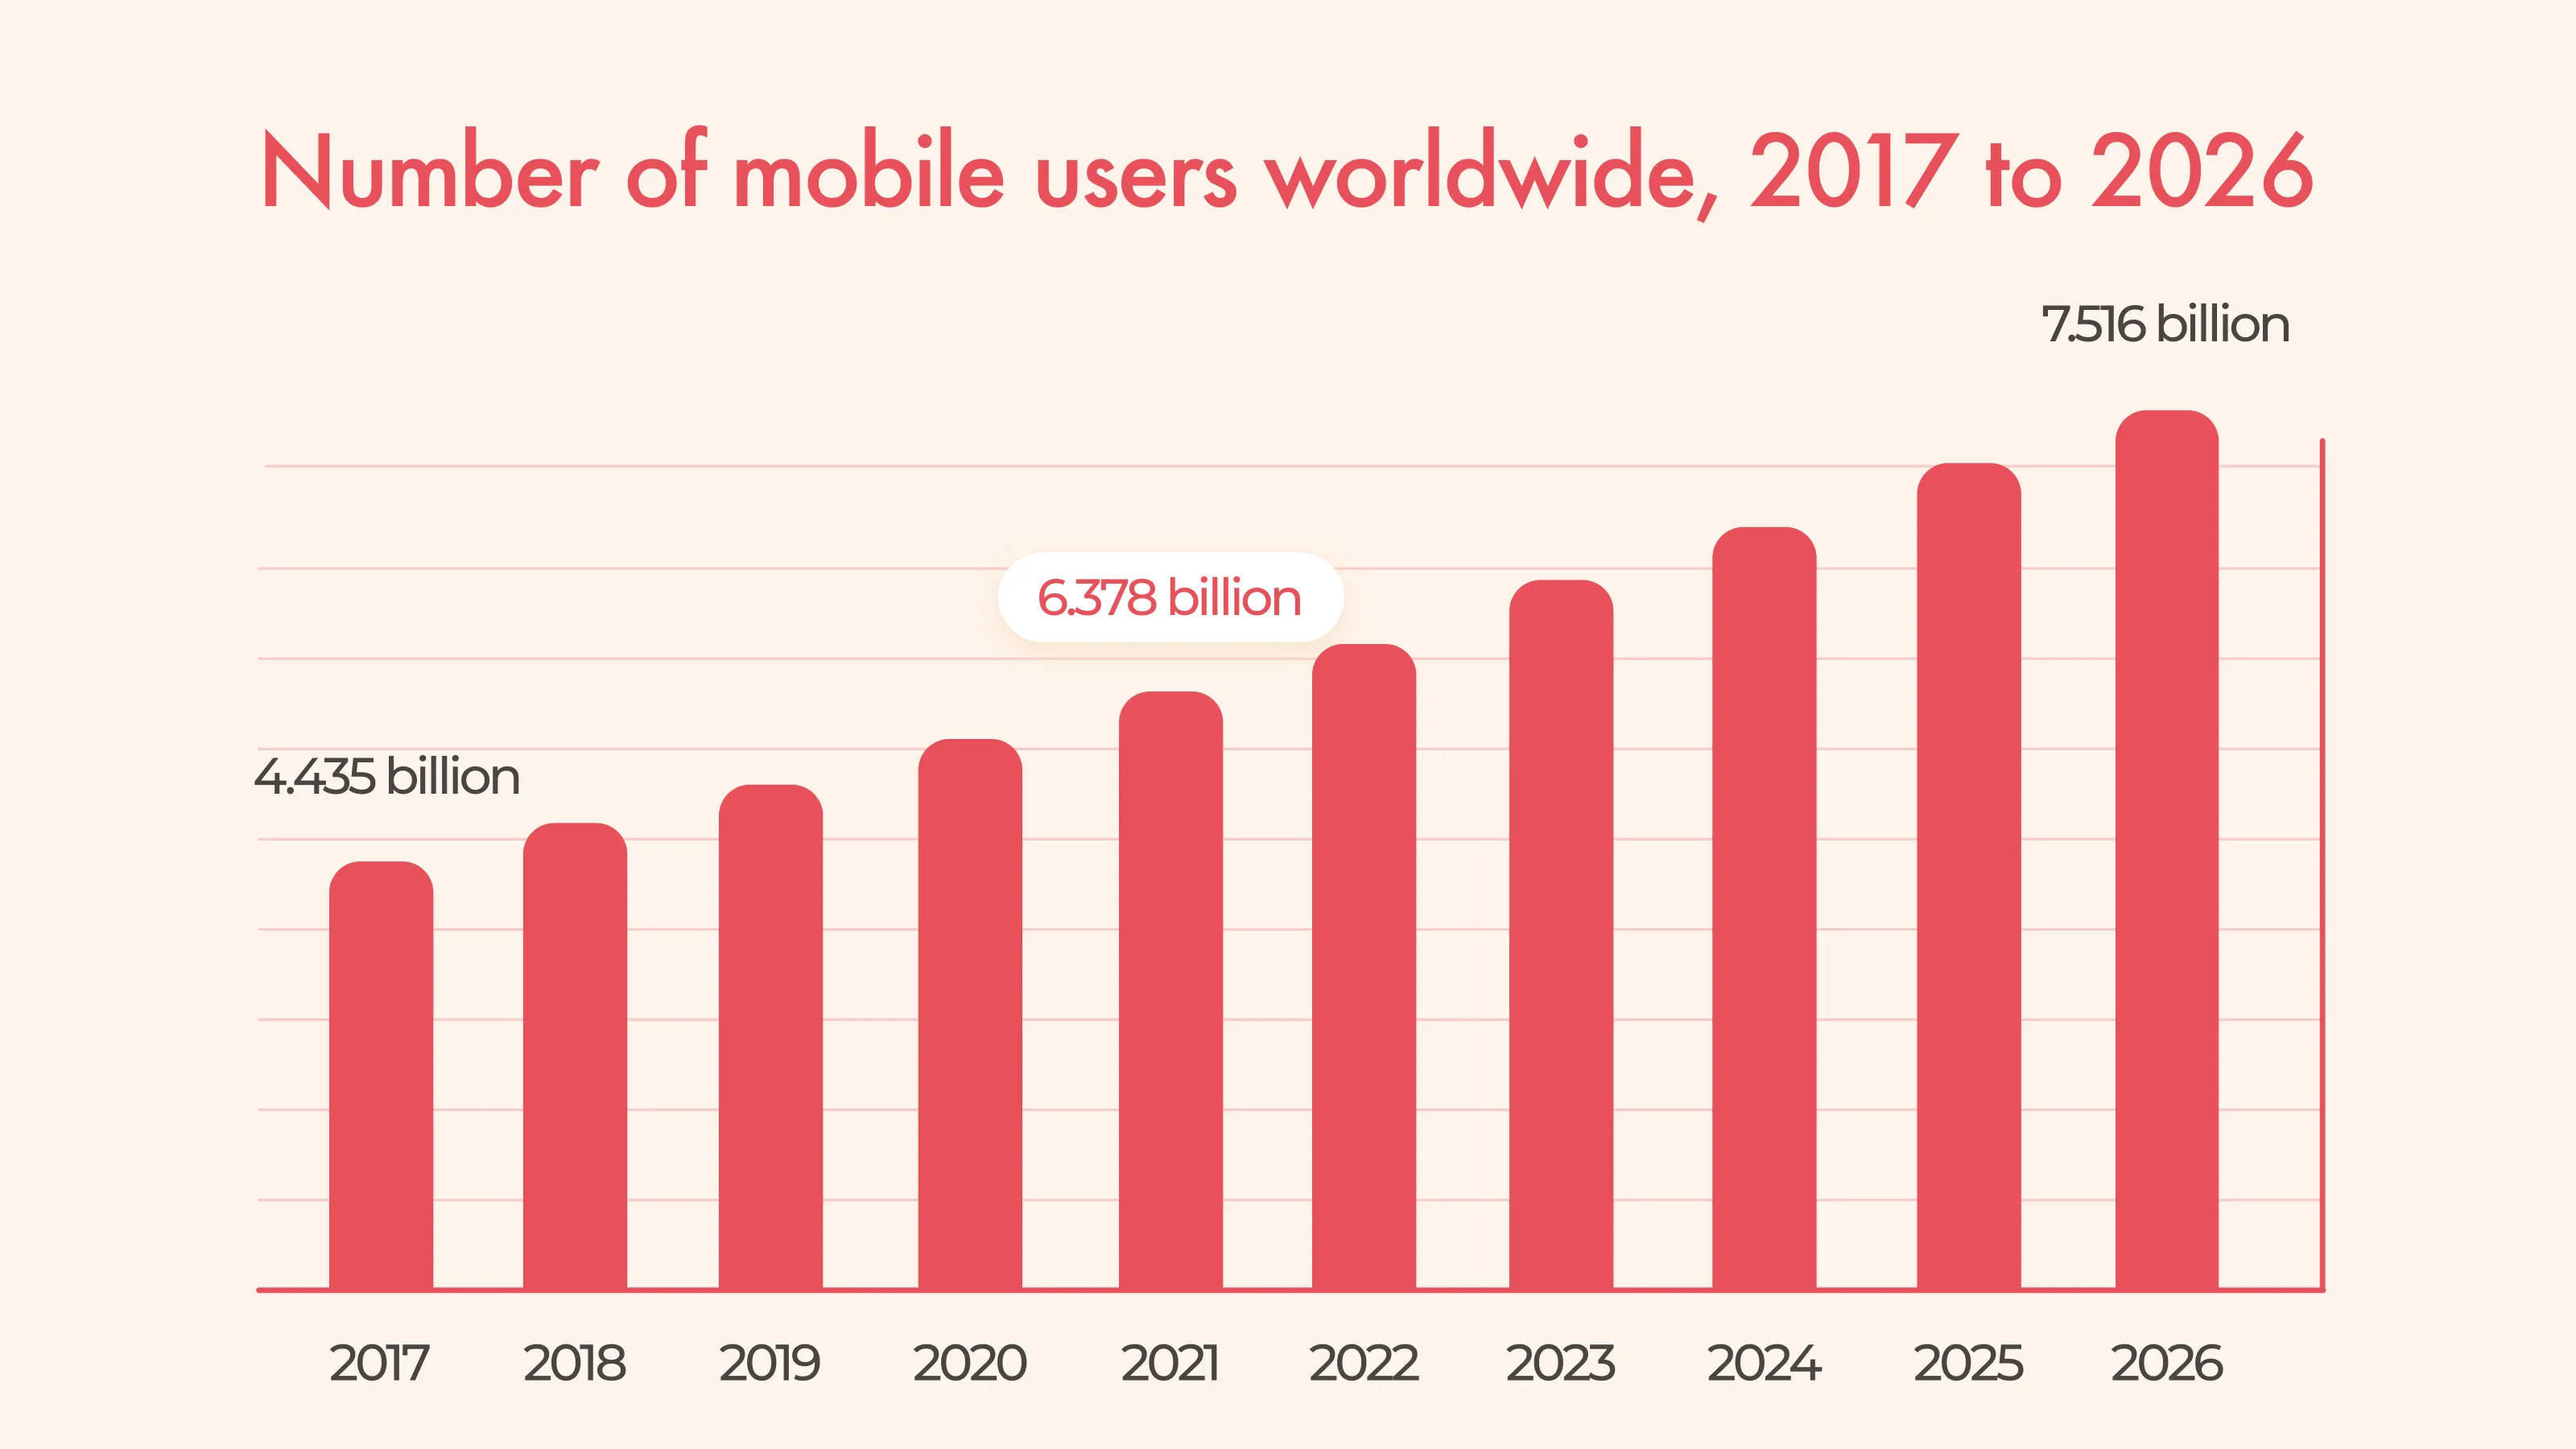 Number of mobile users worldwide